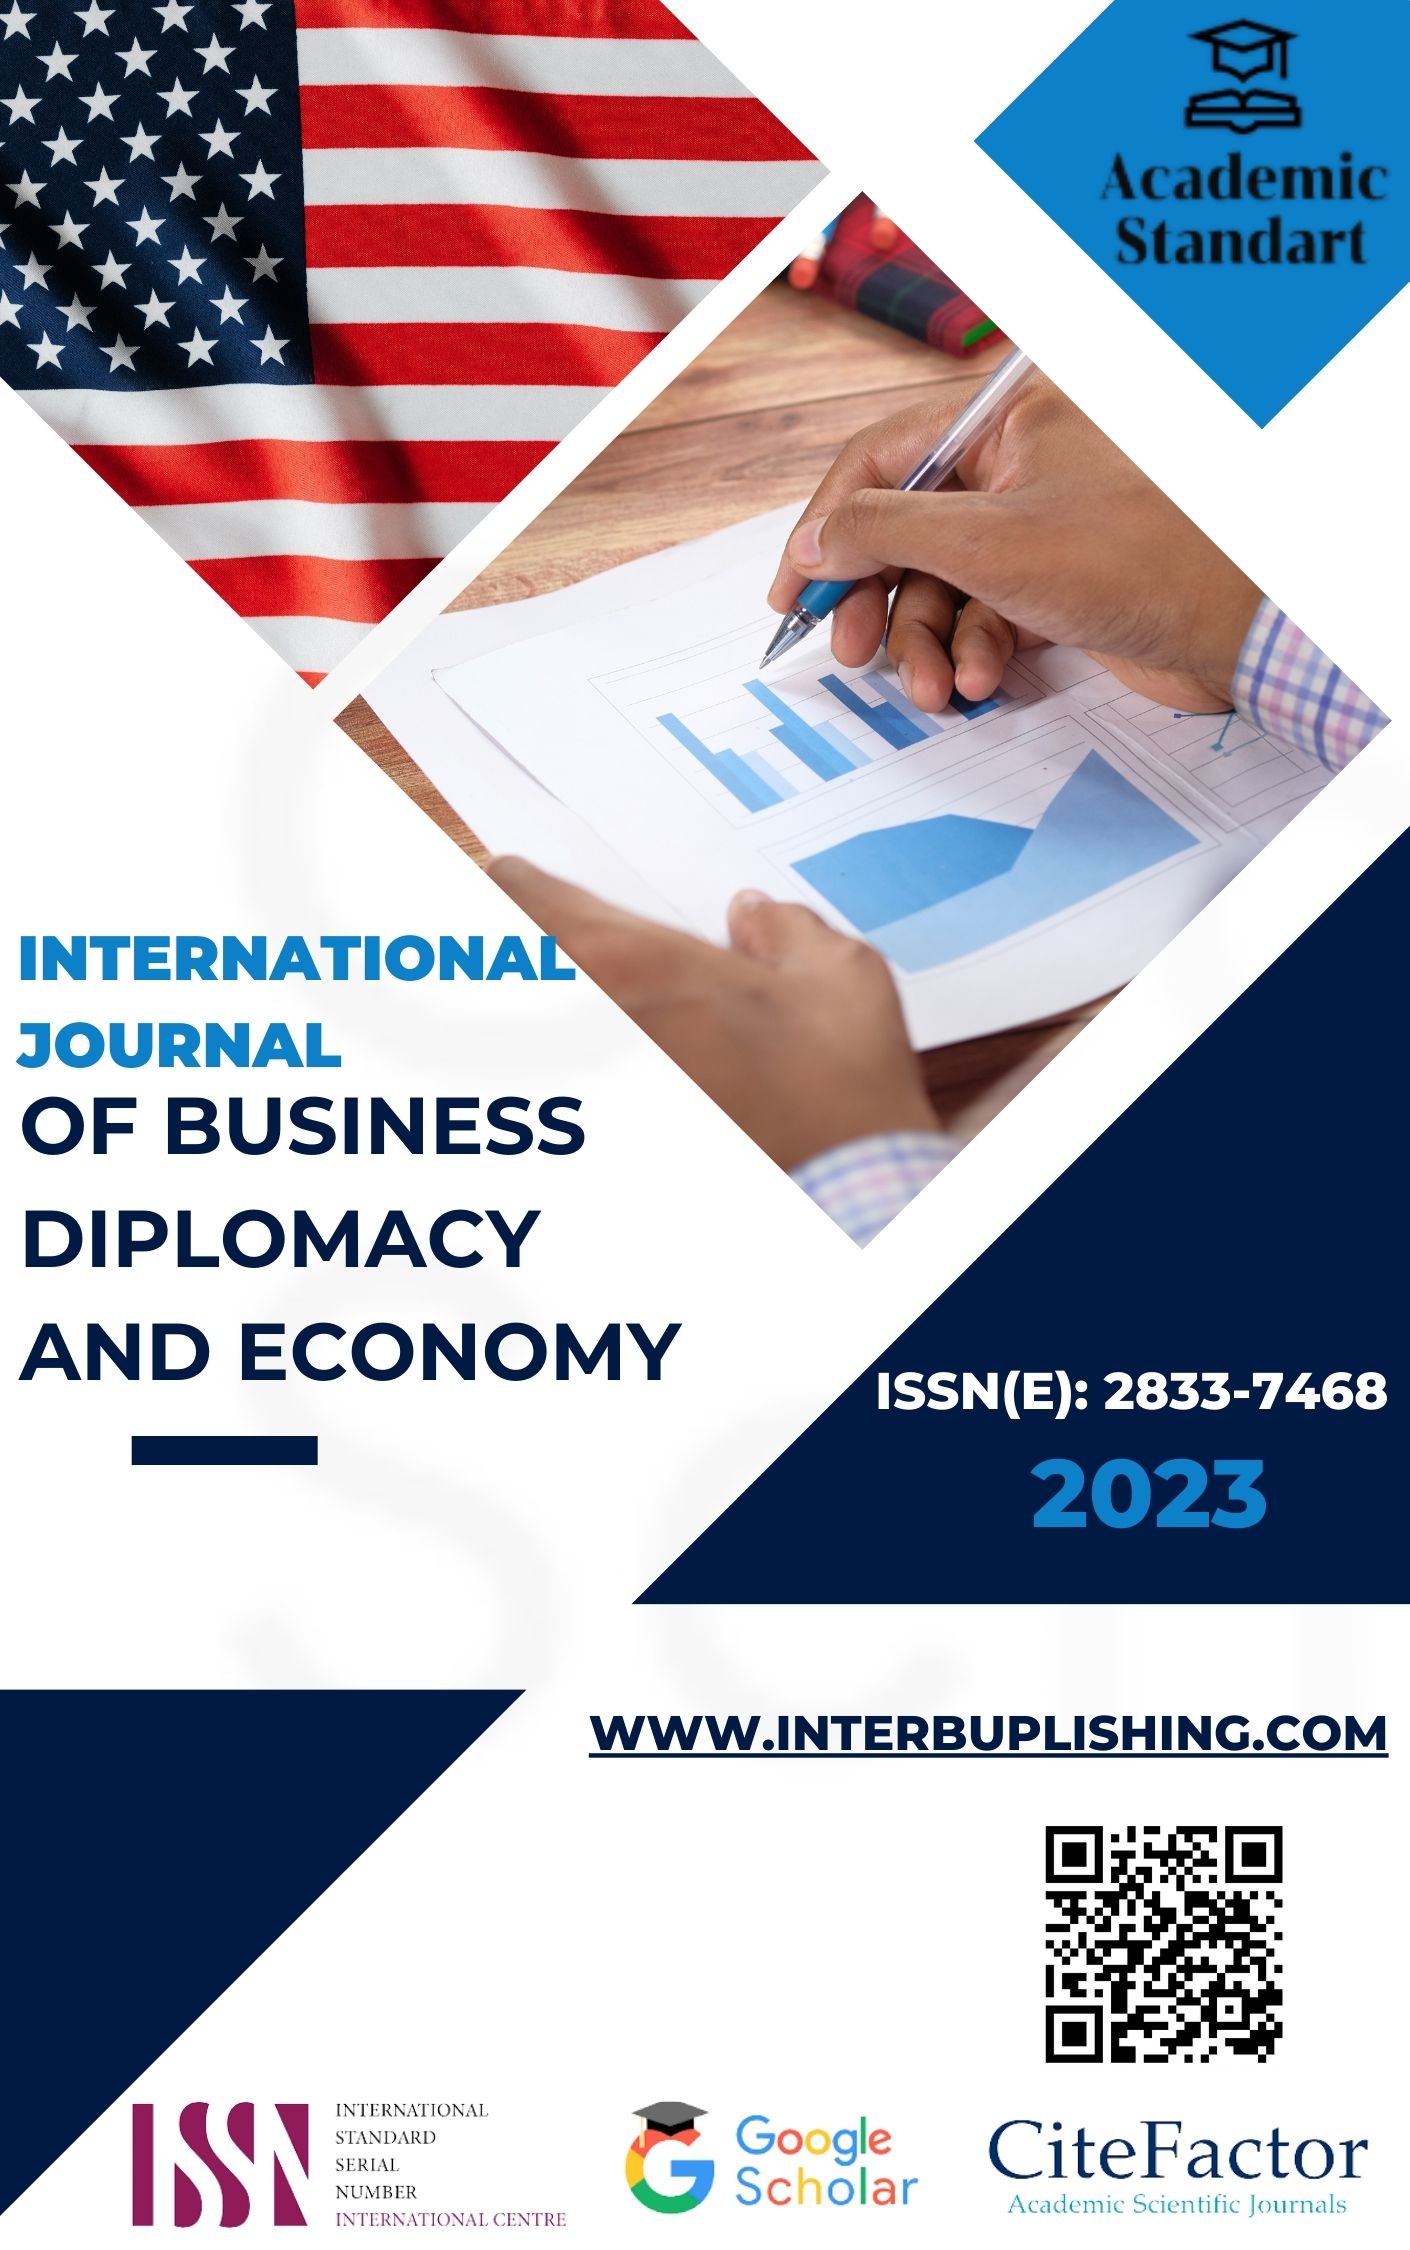 INTERNATIONAL JOURNAL OF BUSINESS DIPLOMACY AND ECONOMY